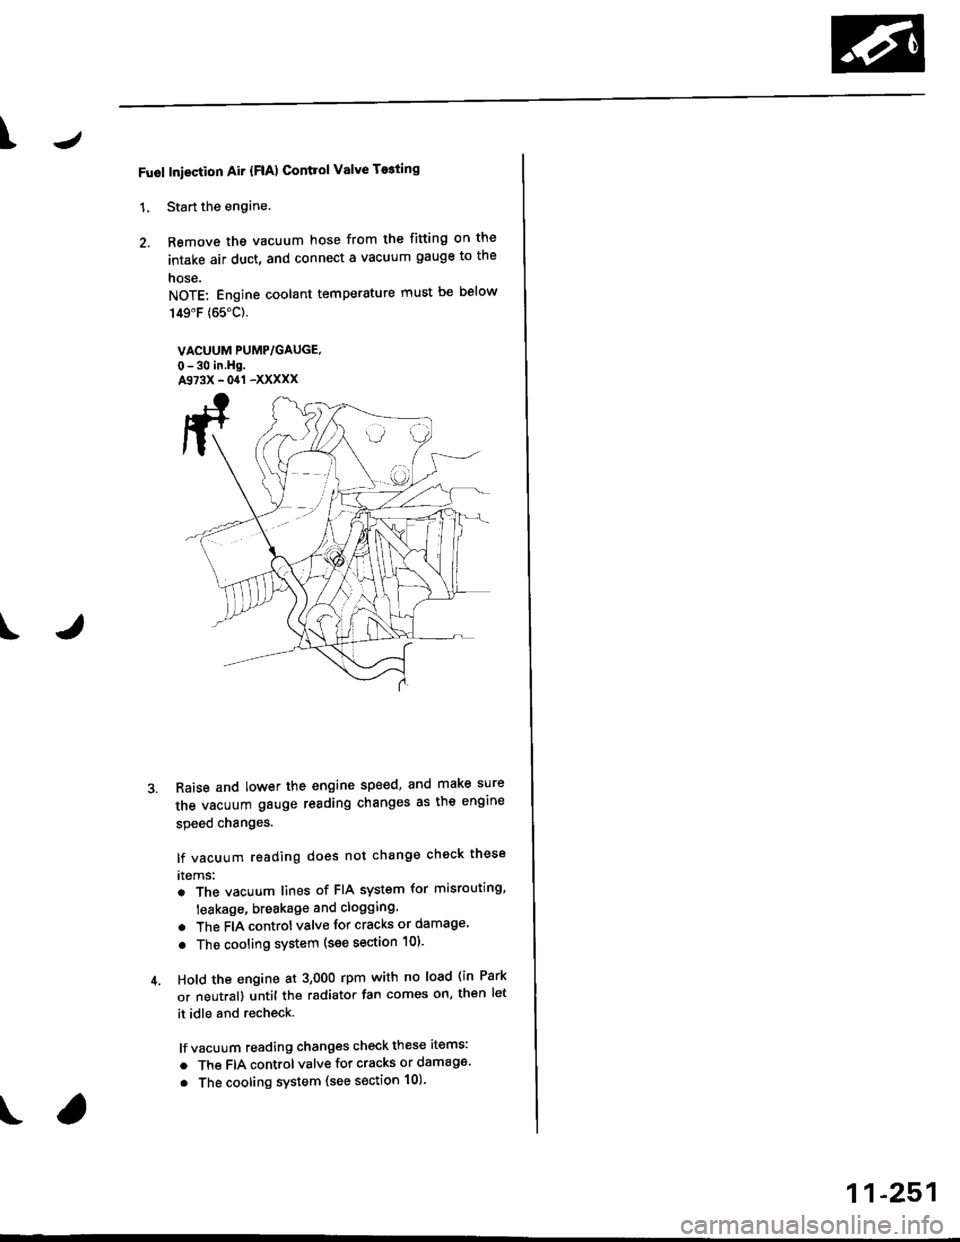 HONDA CIVIC 1996 6.G Workshop Manual \J
Fuol Iniection Air {FlA) Contlol Valve T$ting
1. Start the engine.
2. Remove the vacuum hose from the fitting on the
intake air duct, and connect a vacuum gauge to the
nose.
NOTE: Engine coolant te